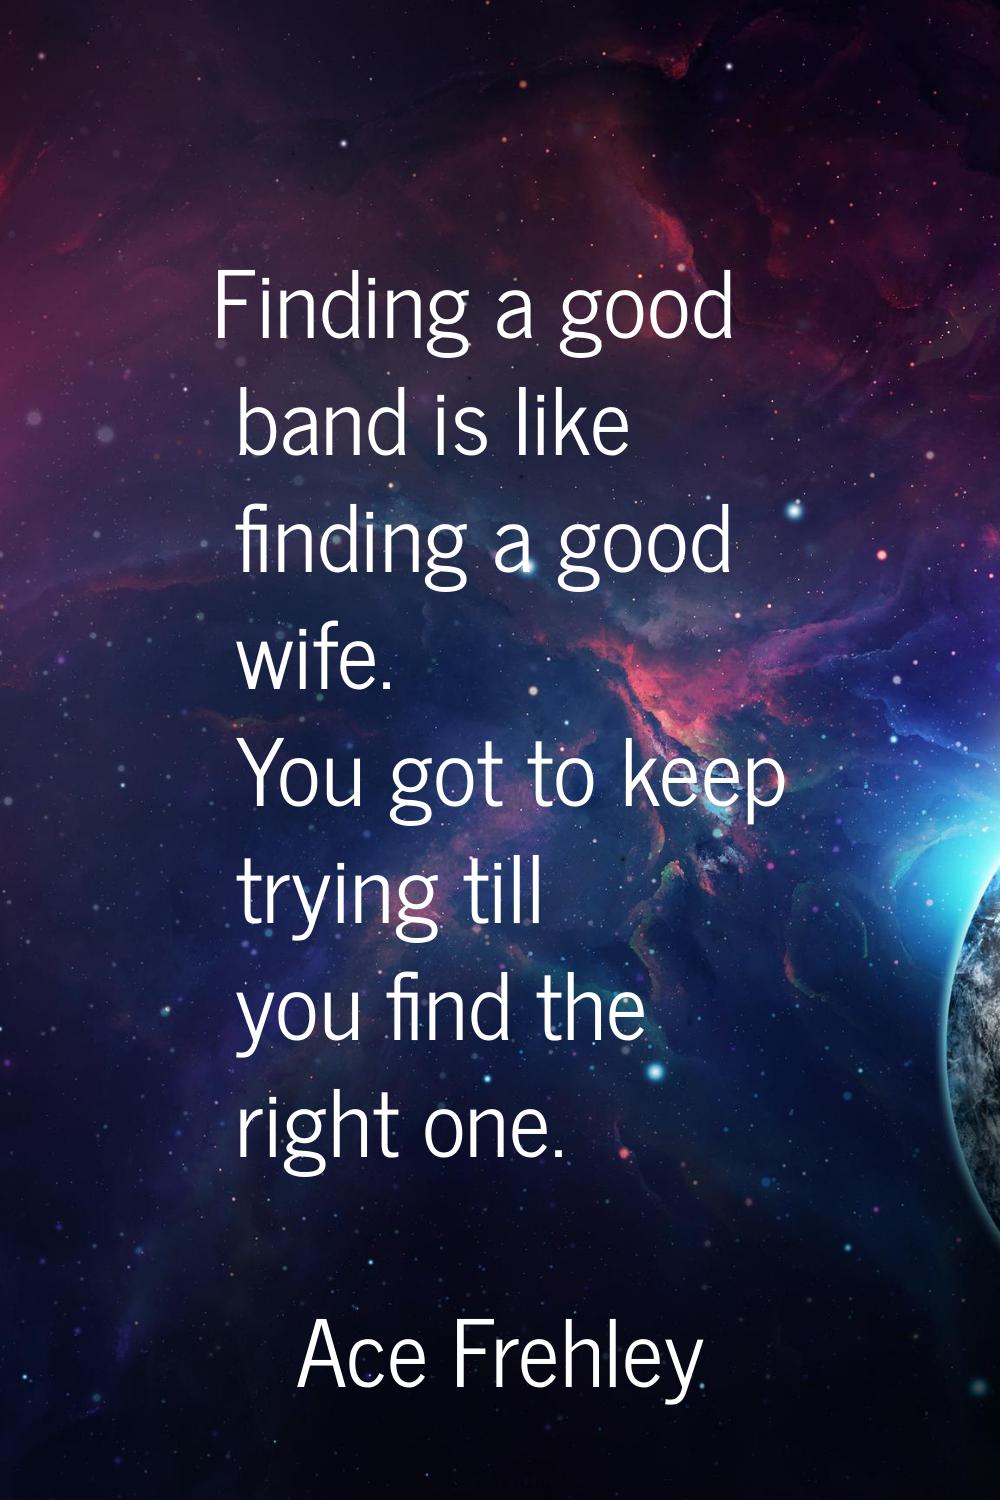 Finding a good band is Iike finding a good wife. You got to keep trying till you find the right one